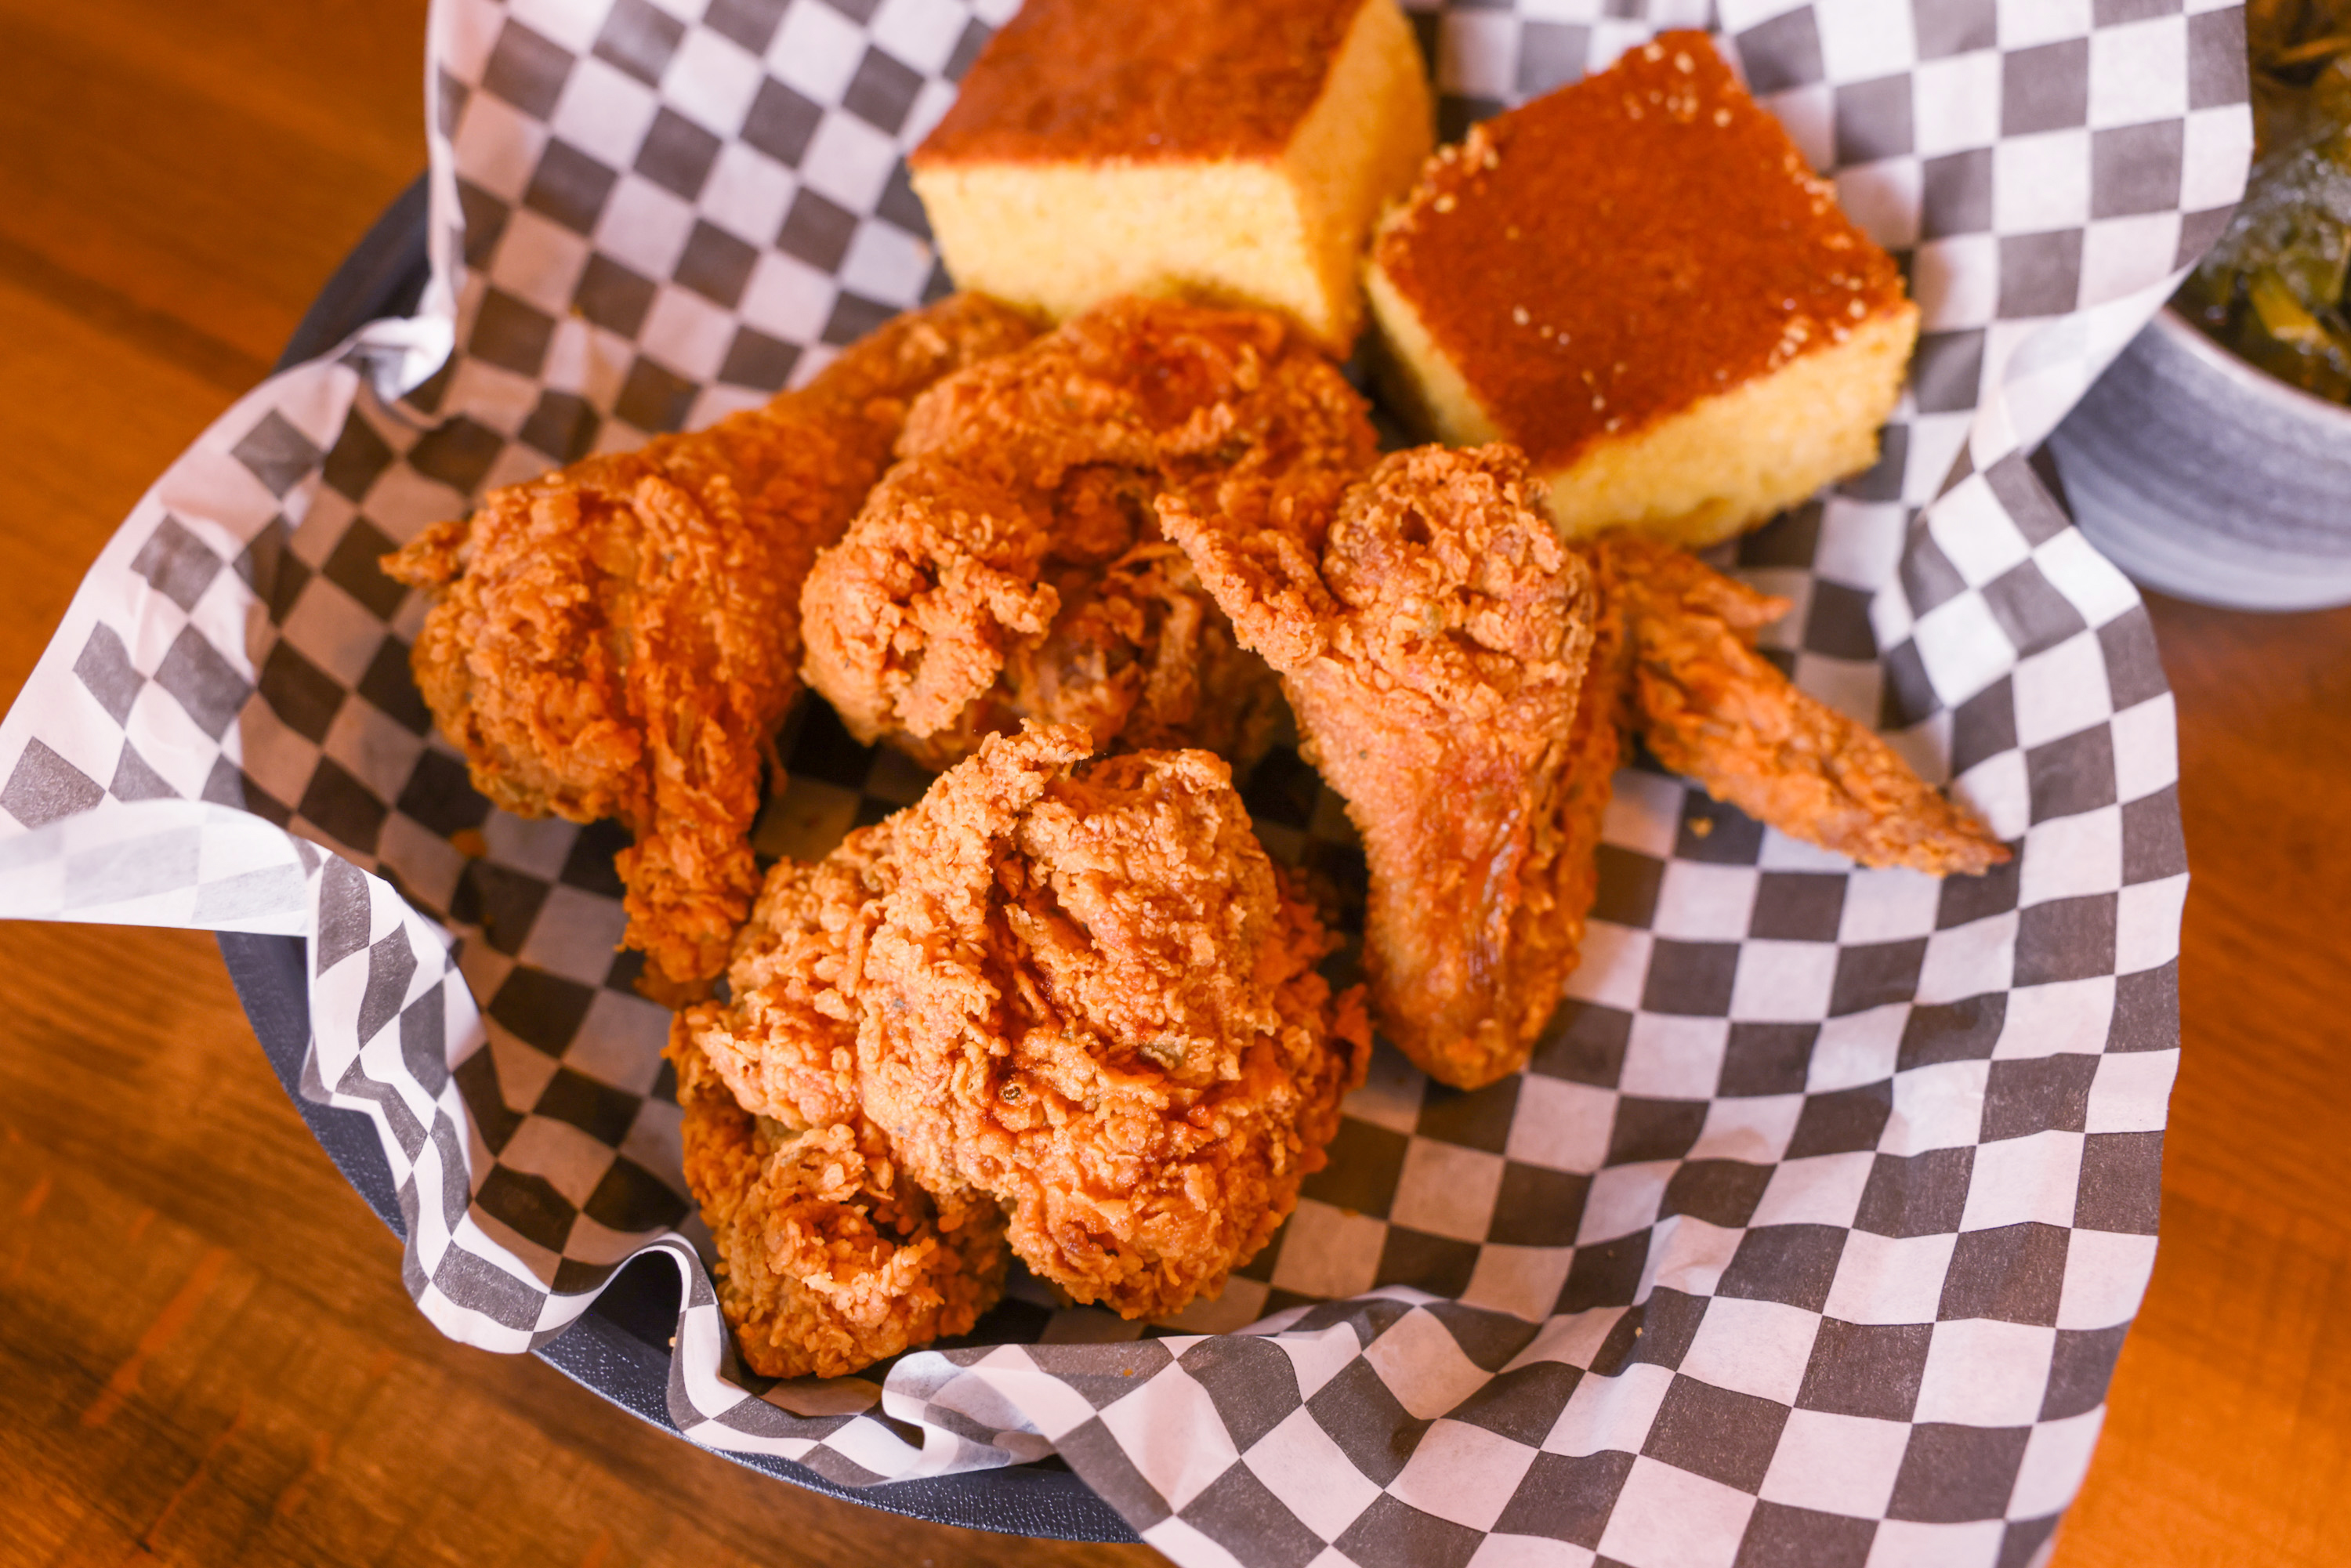 Fried chicken and cornbread in a basket with checkered paper; collard greens visible in the background.